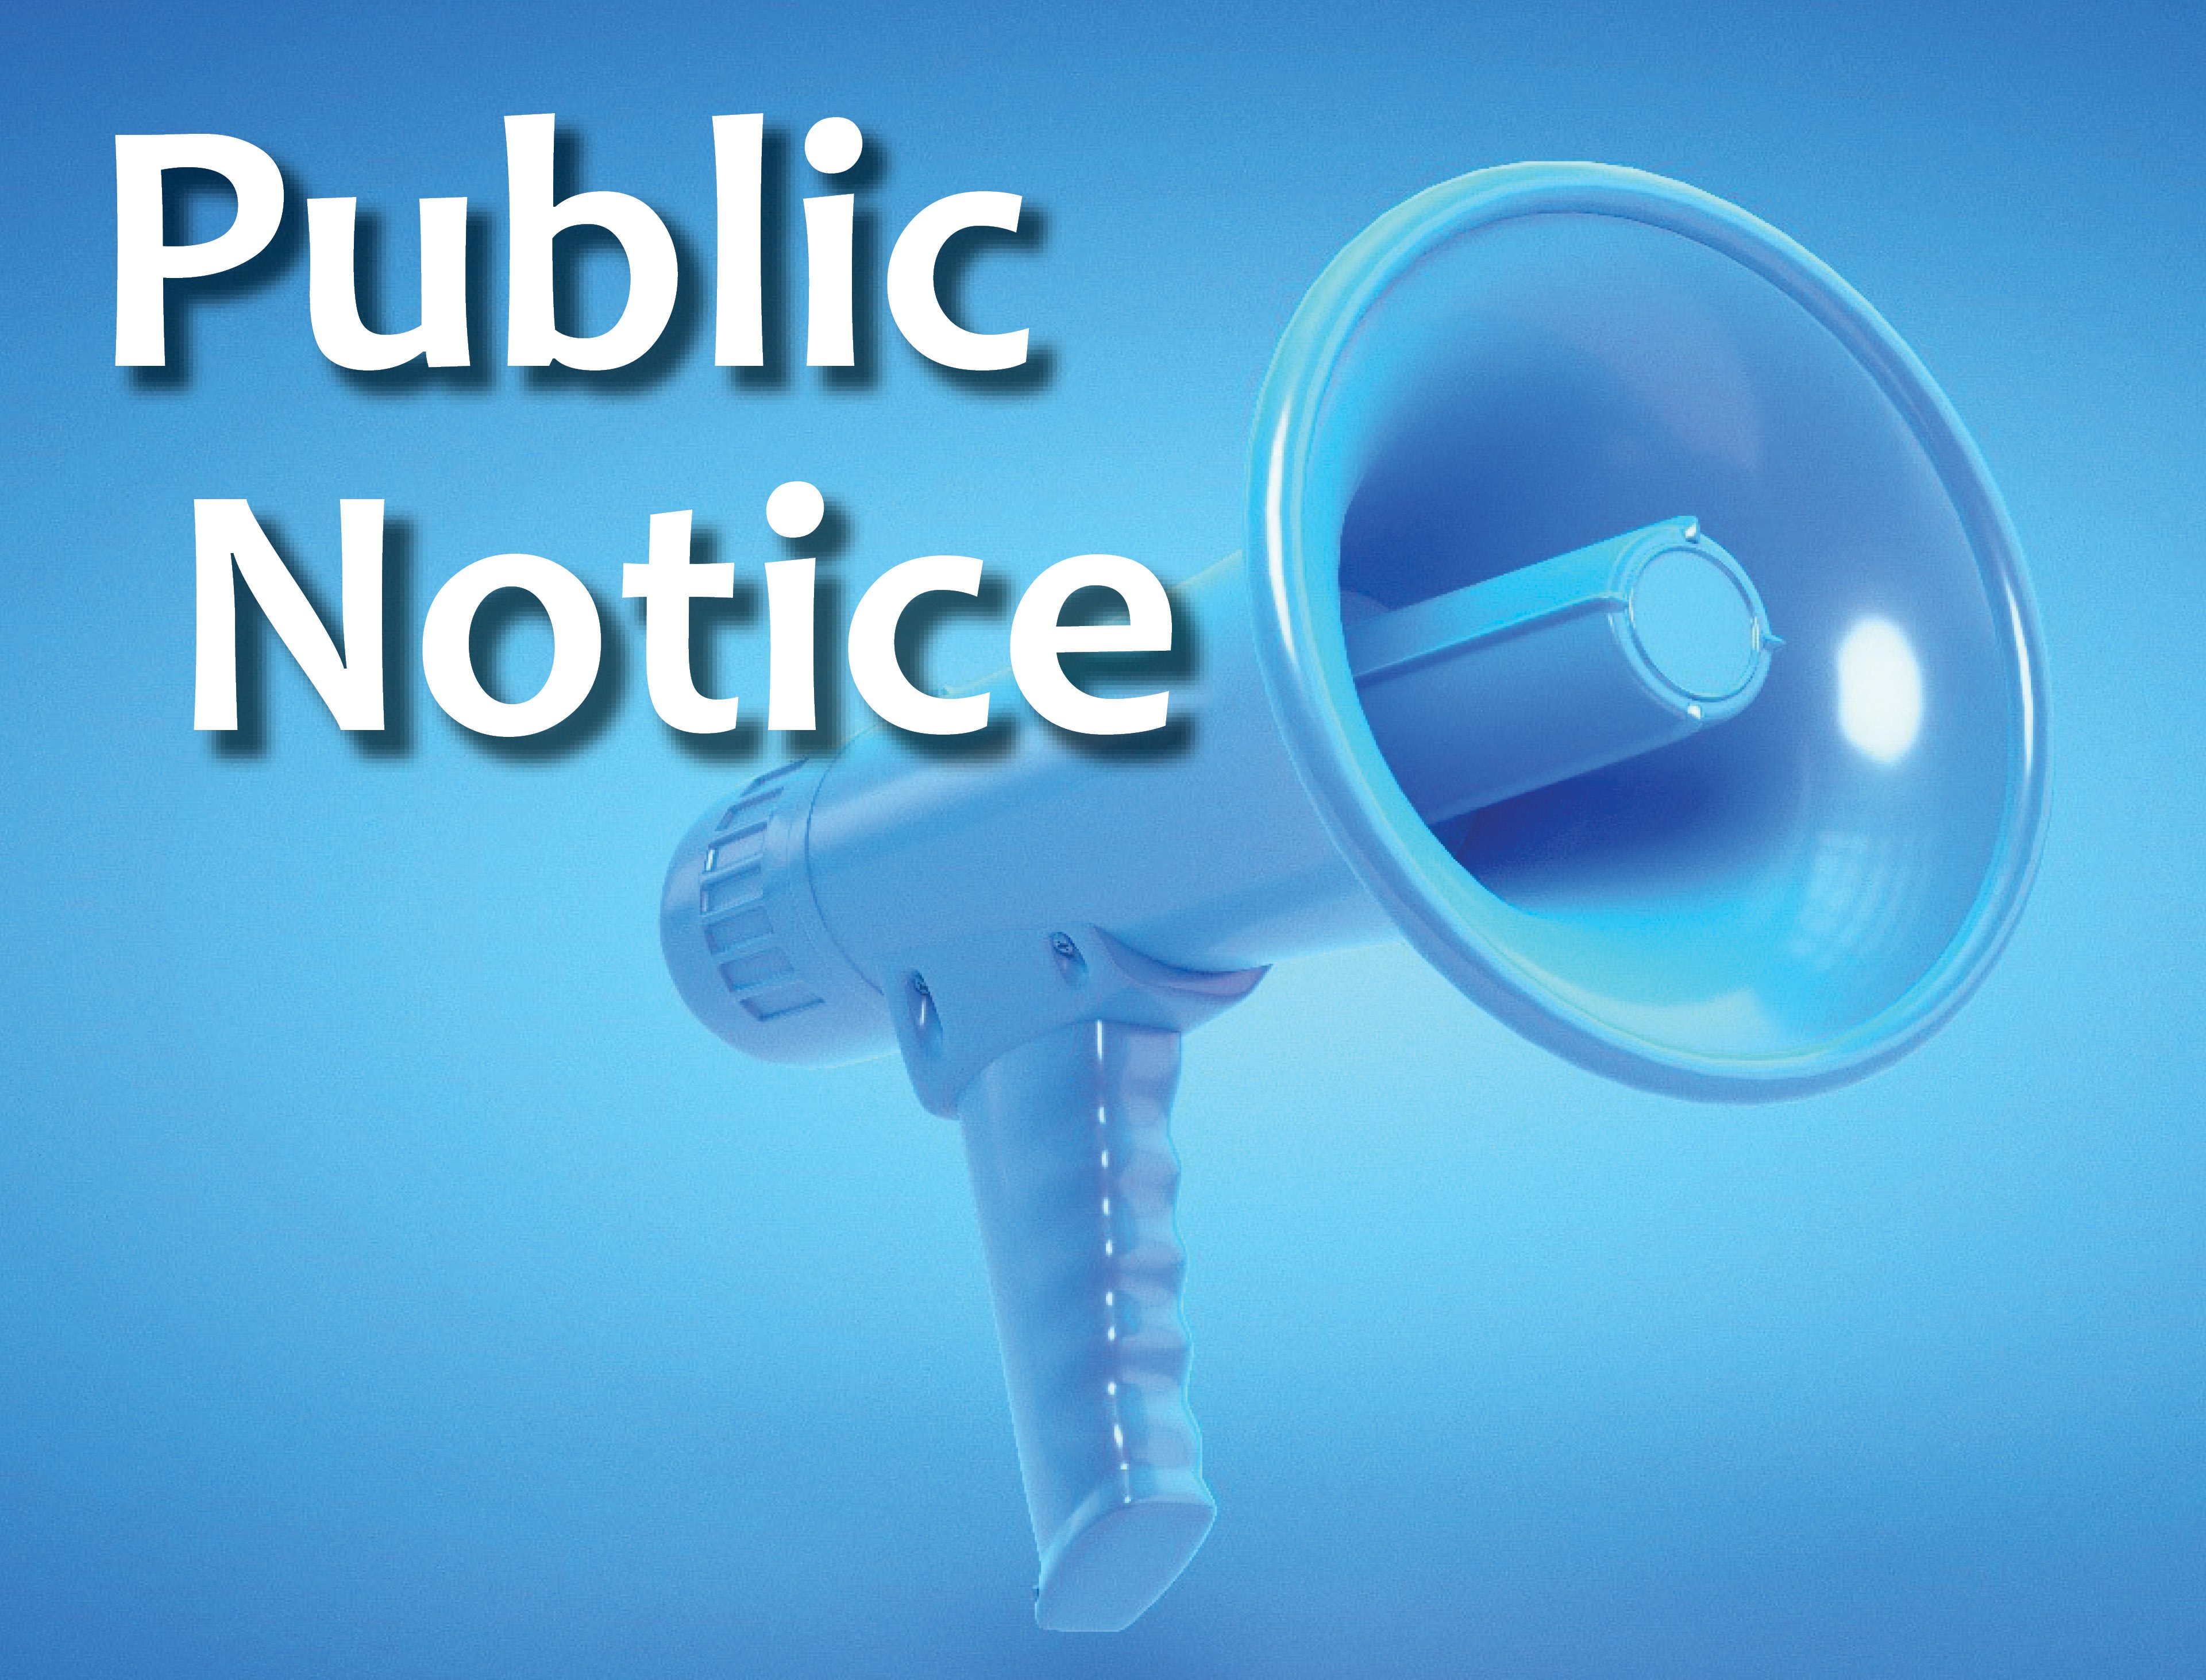 Public Notice text over picture of a megaphone